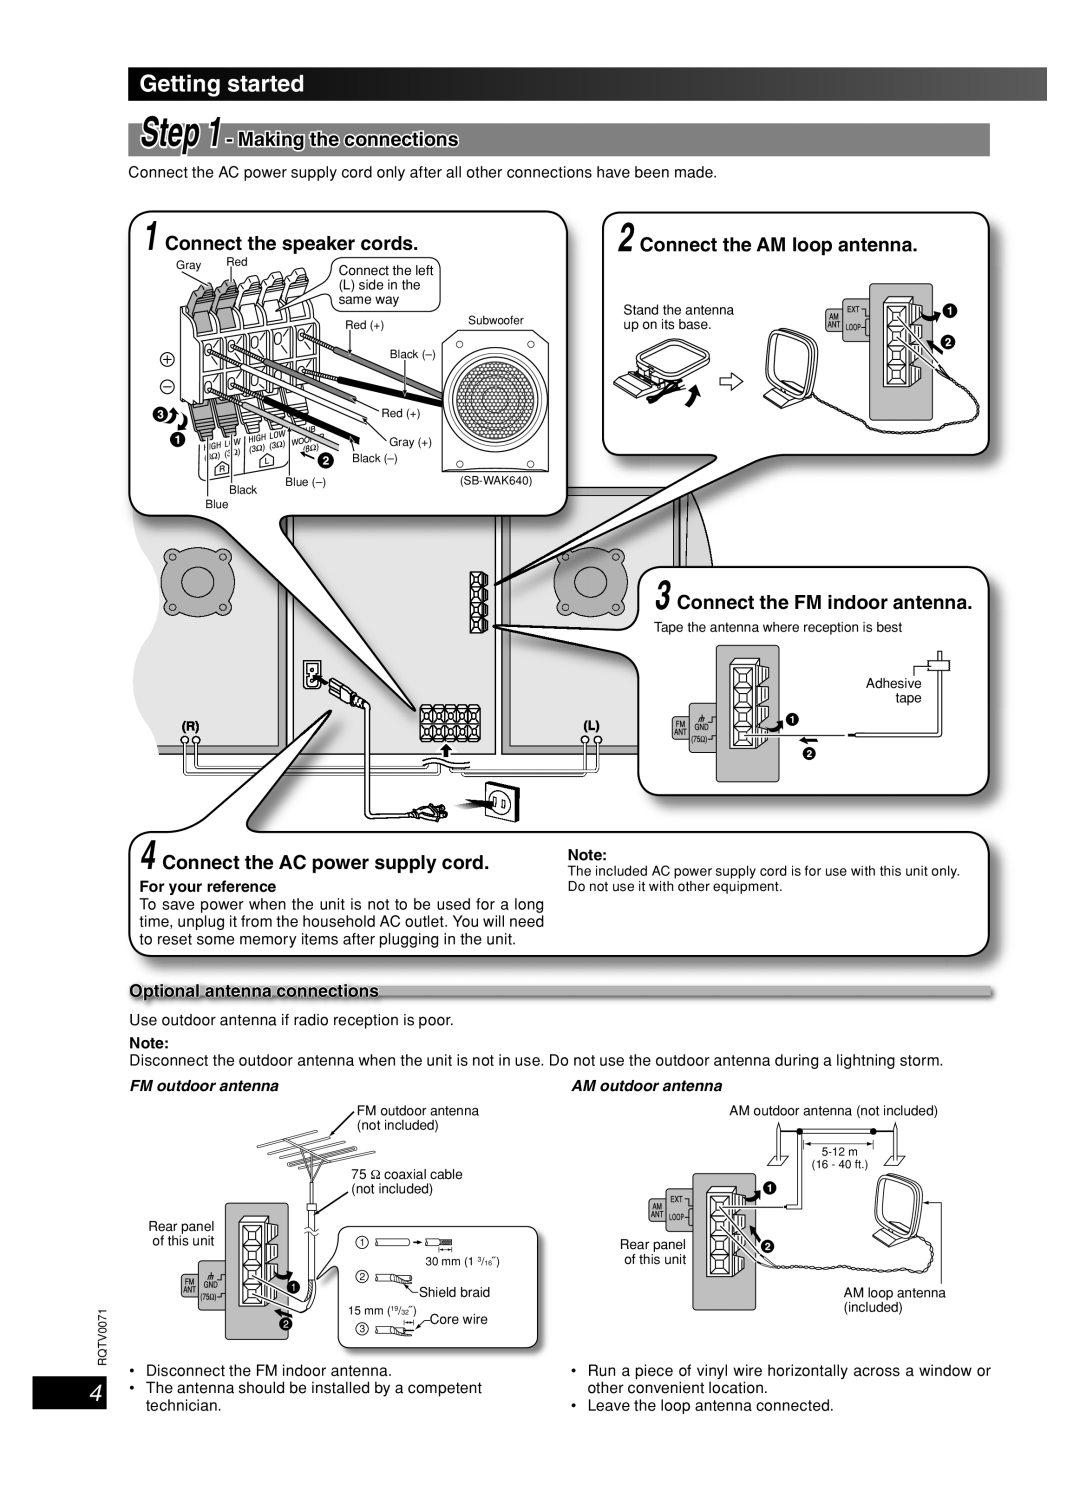 Panasonic SC-AK640 Getting started, English Dansk Français Lang, Connect the AM loop antenna, Optional antenna connections 